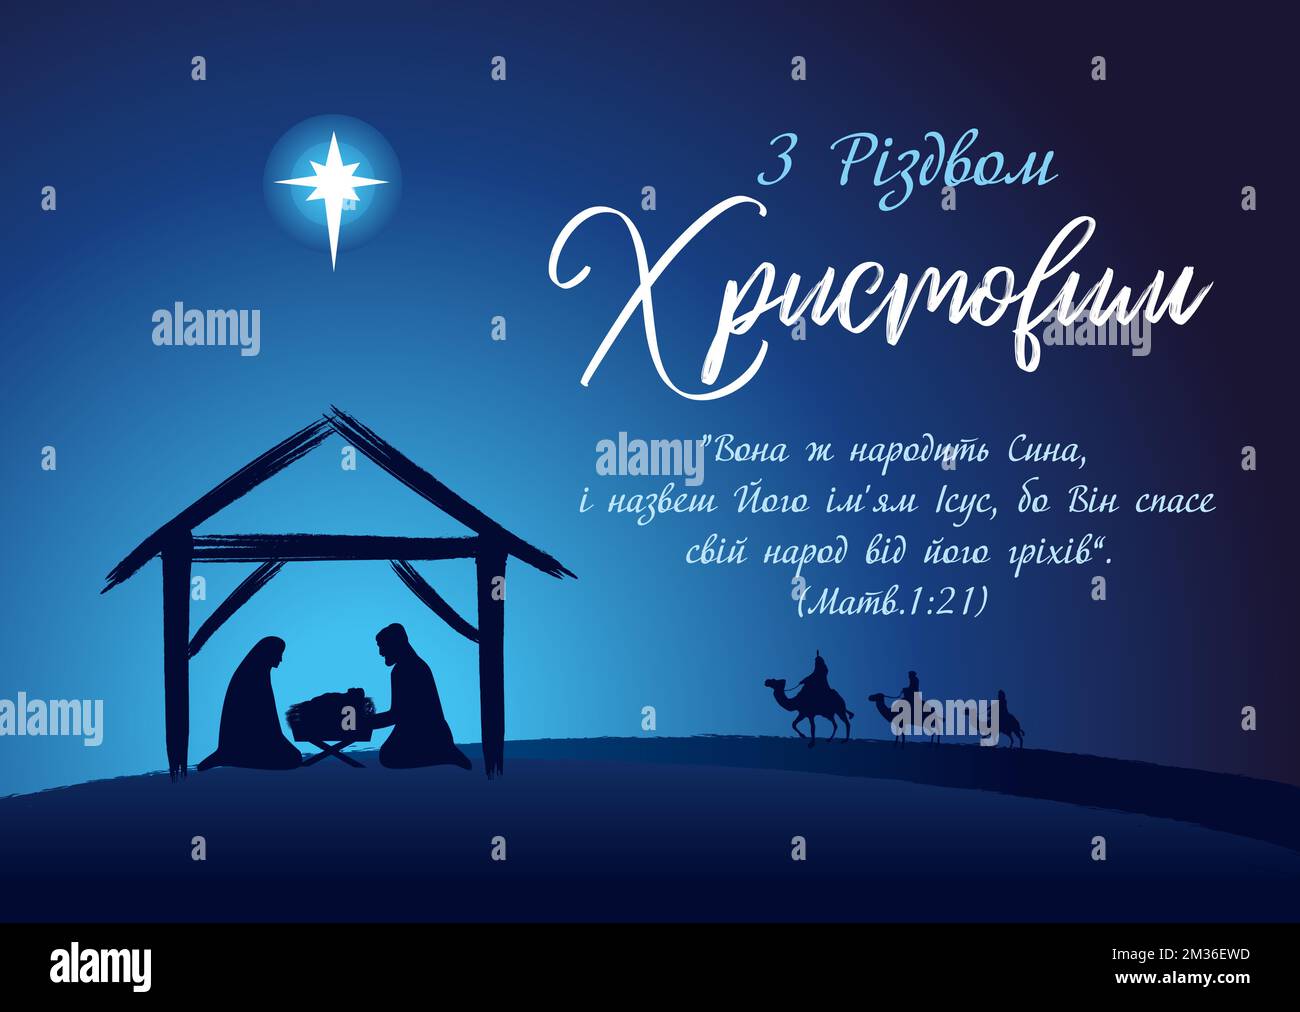 Merry Christmas, birth of Christ greeting card with Ukrainian text. Nativity scene of baby Jesus in the manger with Mary and Joseph, creative image Stock Vector